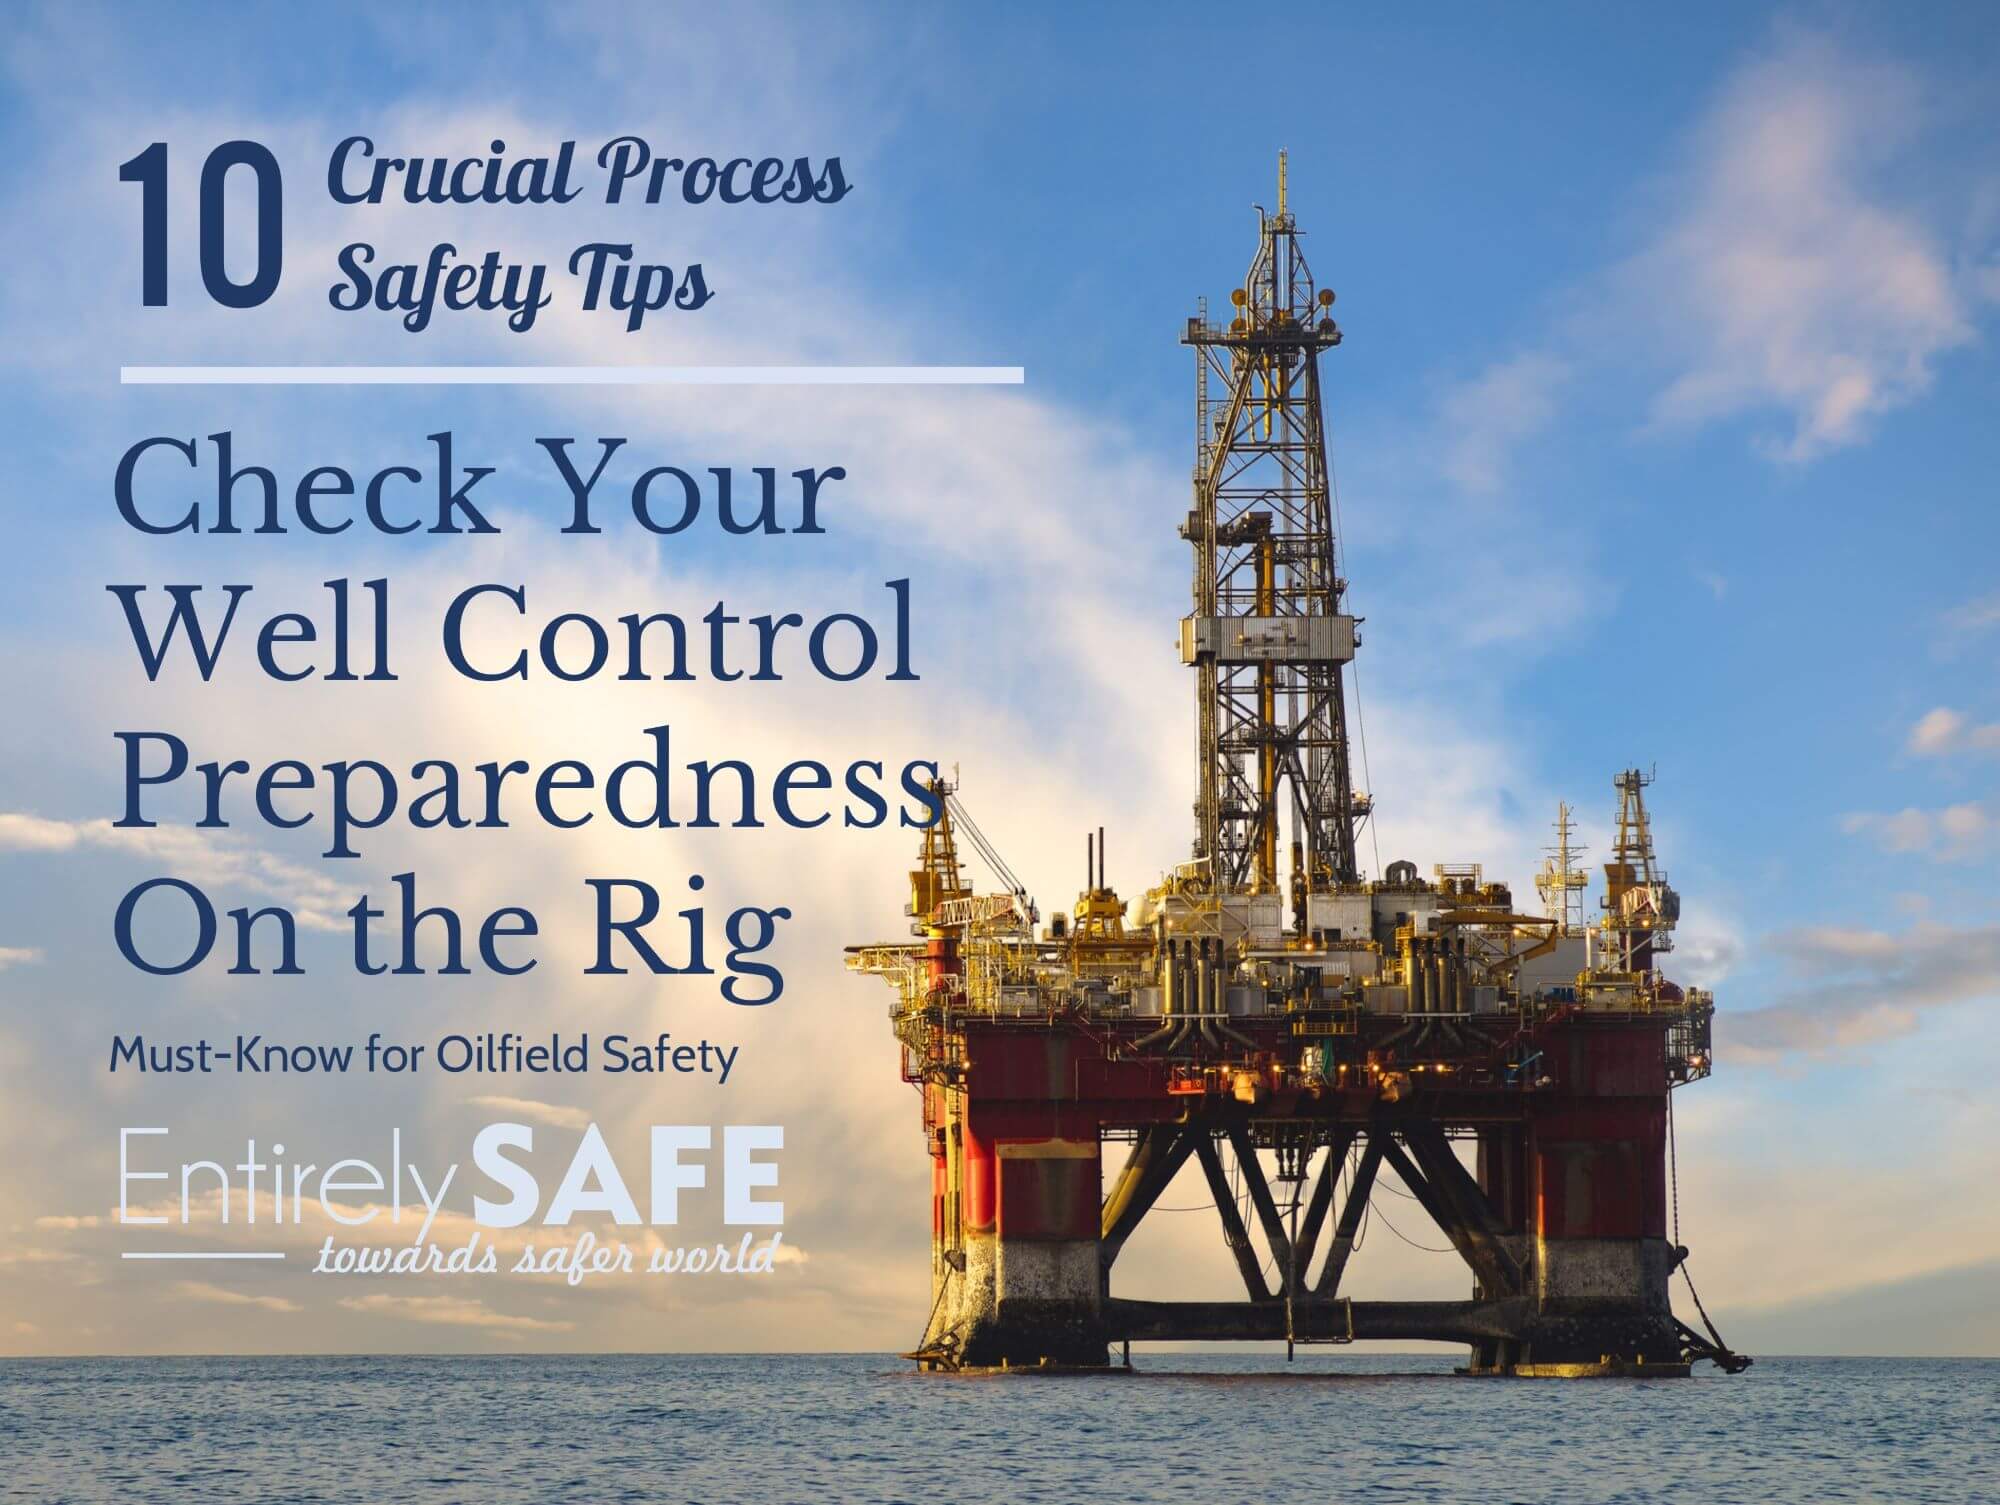 10 Daily Steps To Check Your Well Control Preparedness On Drilling Rigs